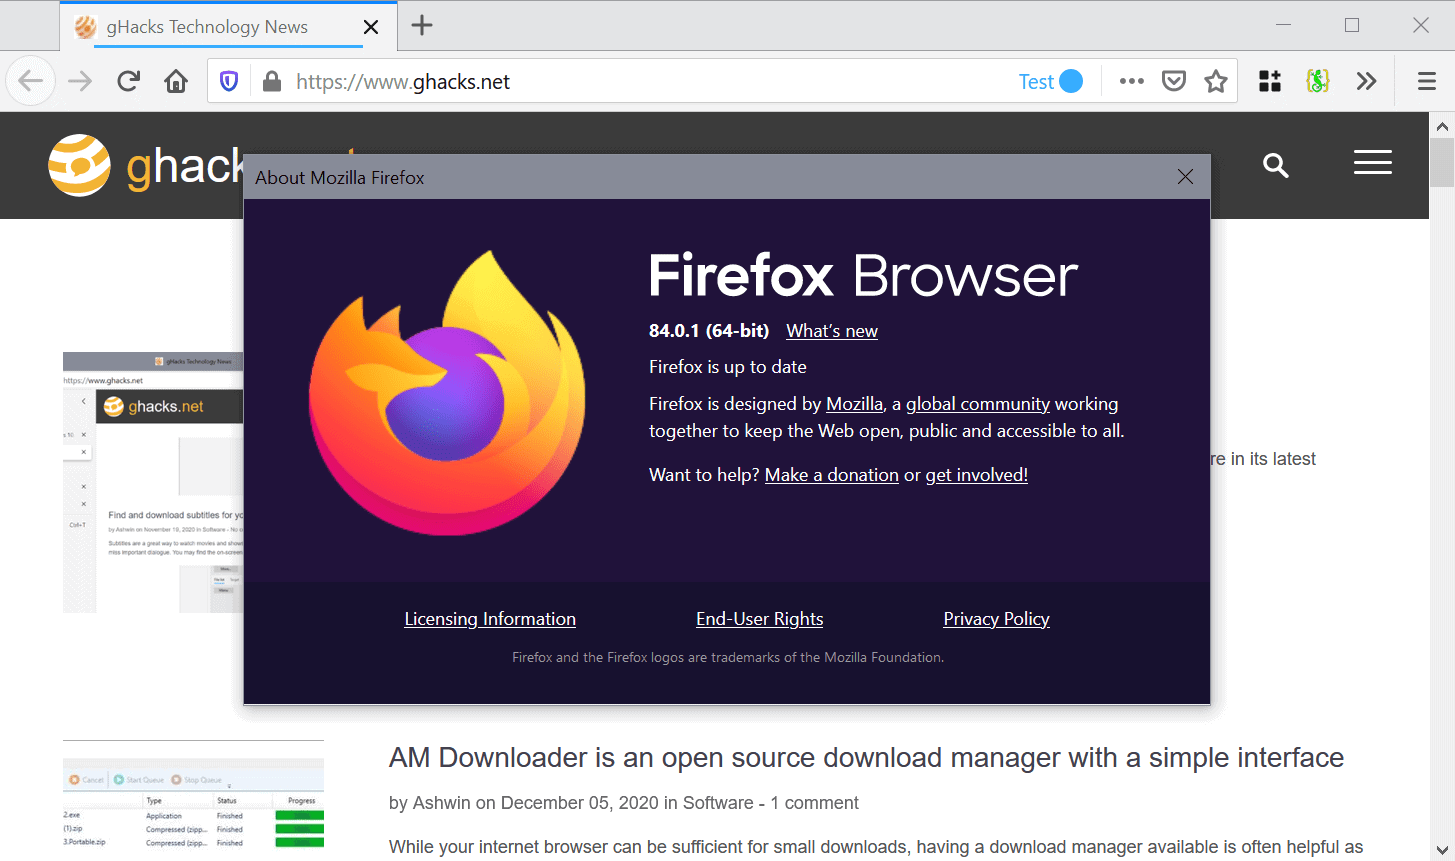 Firefox 84.0.1 update fixes crashes and other issues